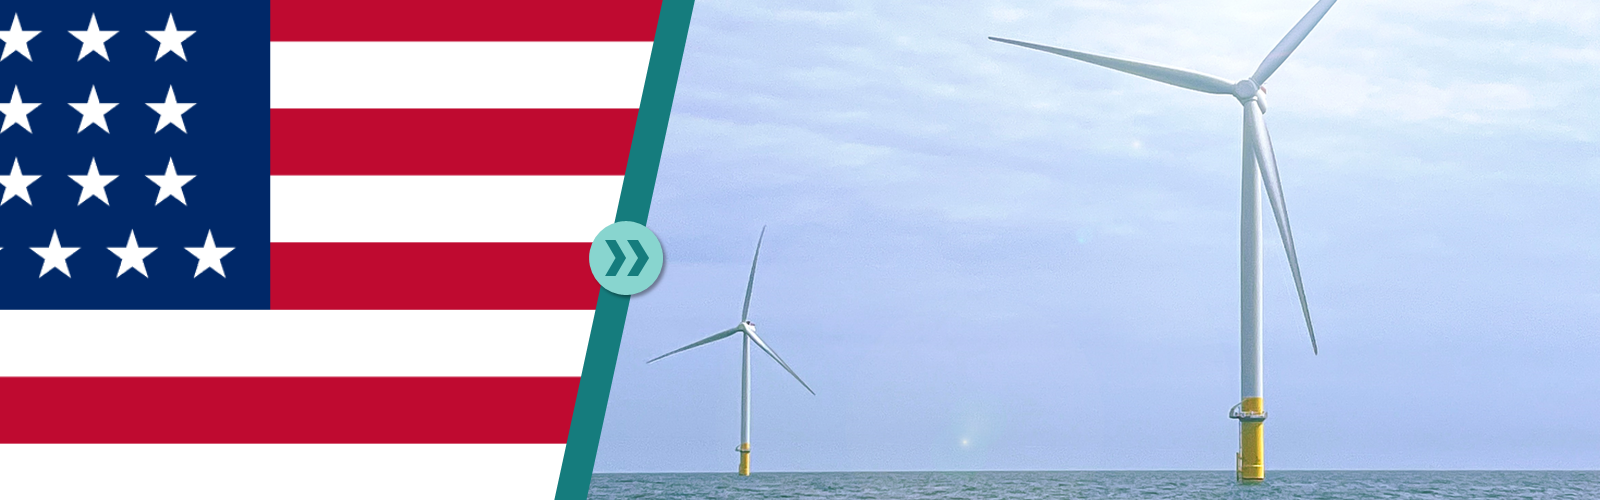 Offshore Wind Installation in the United States